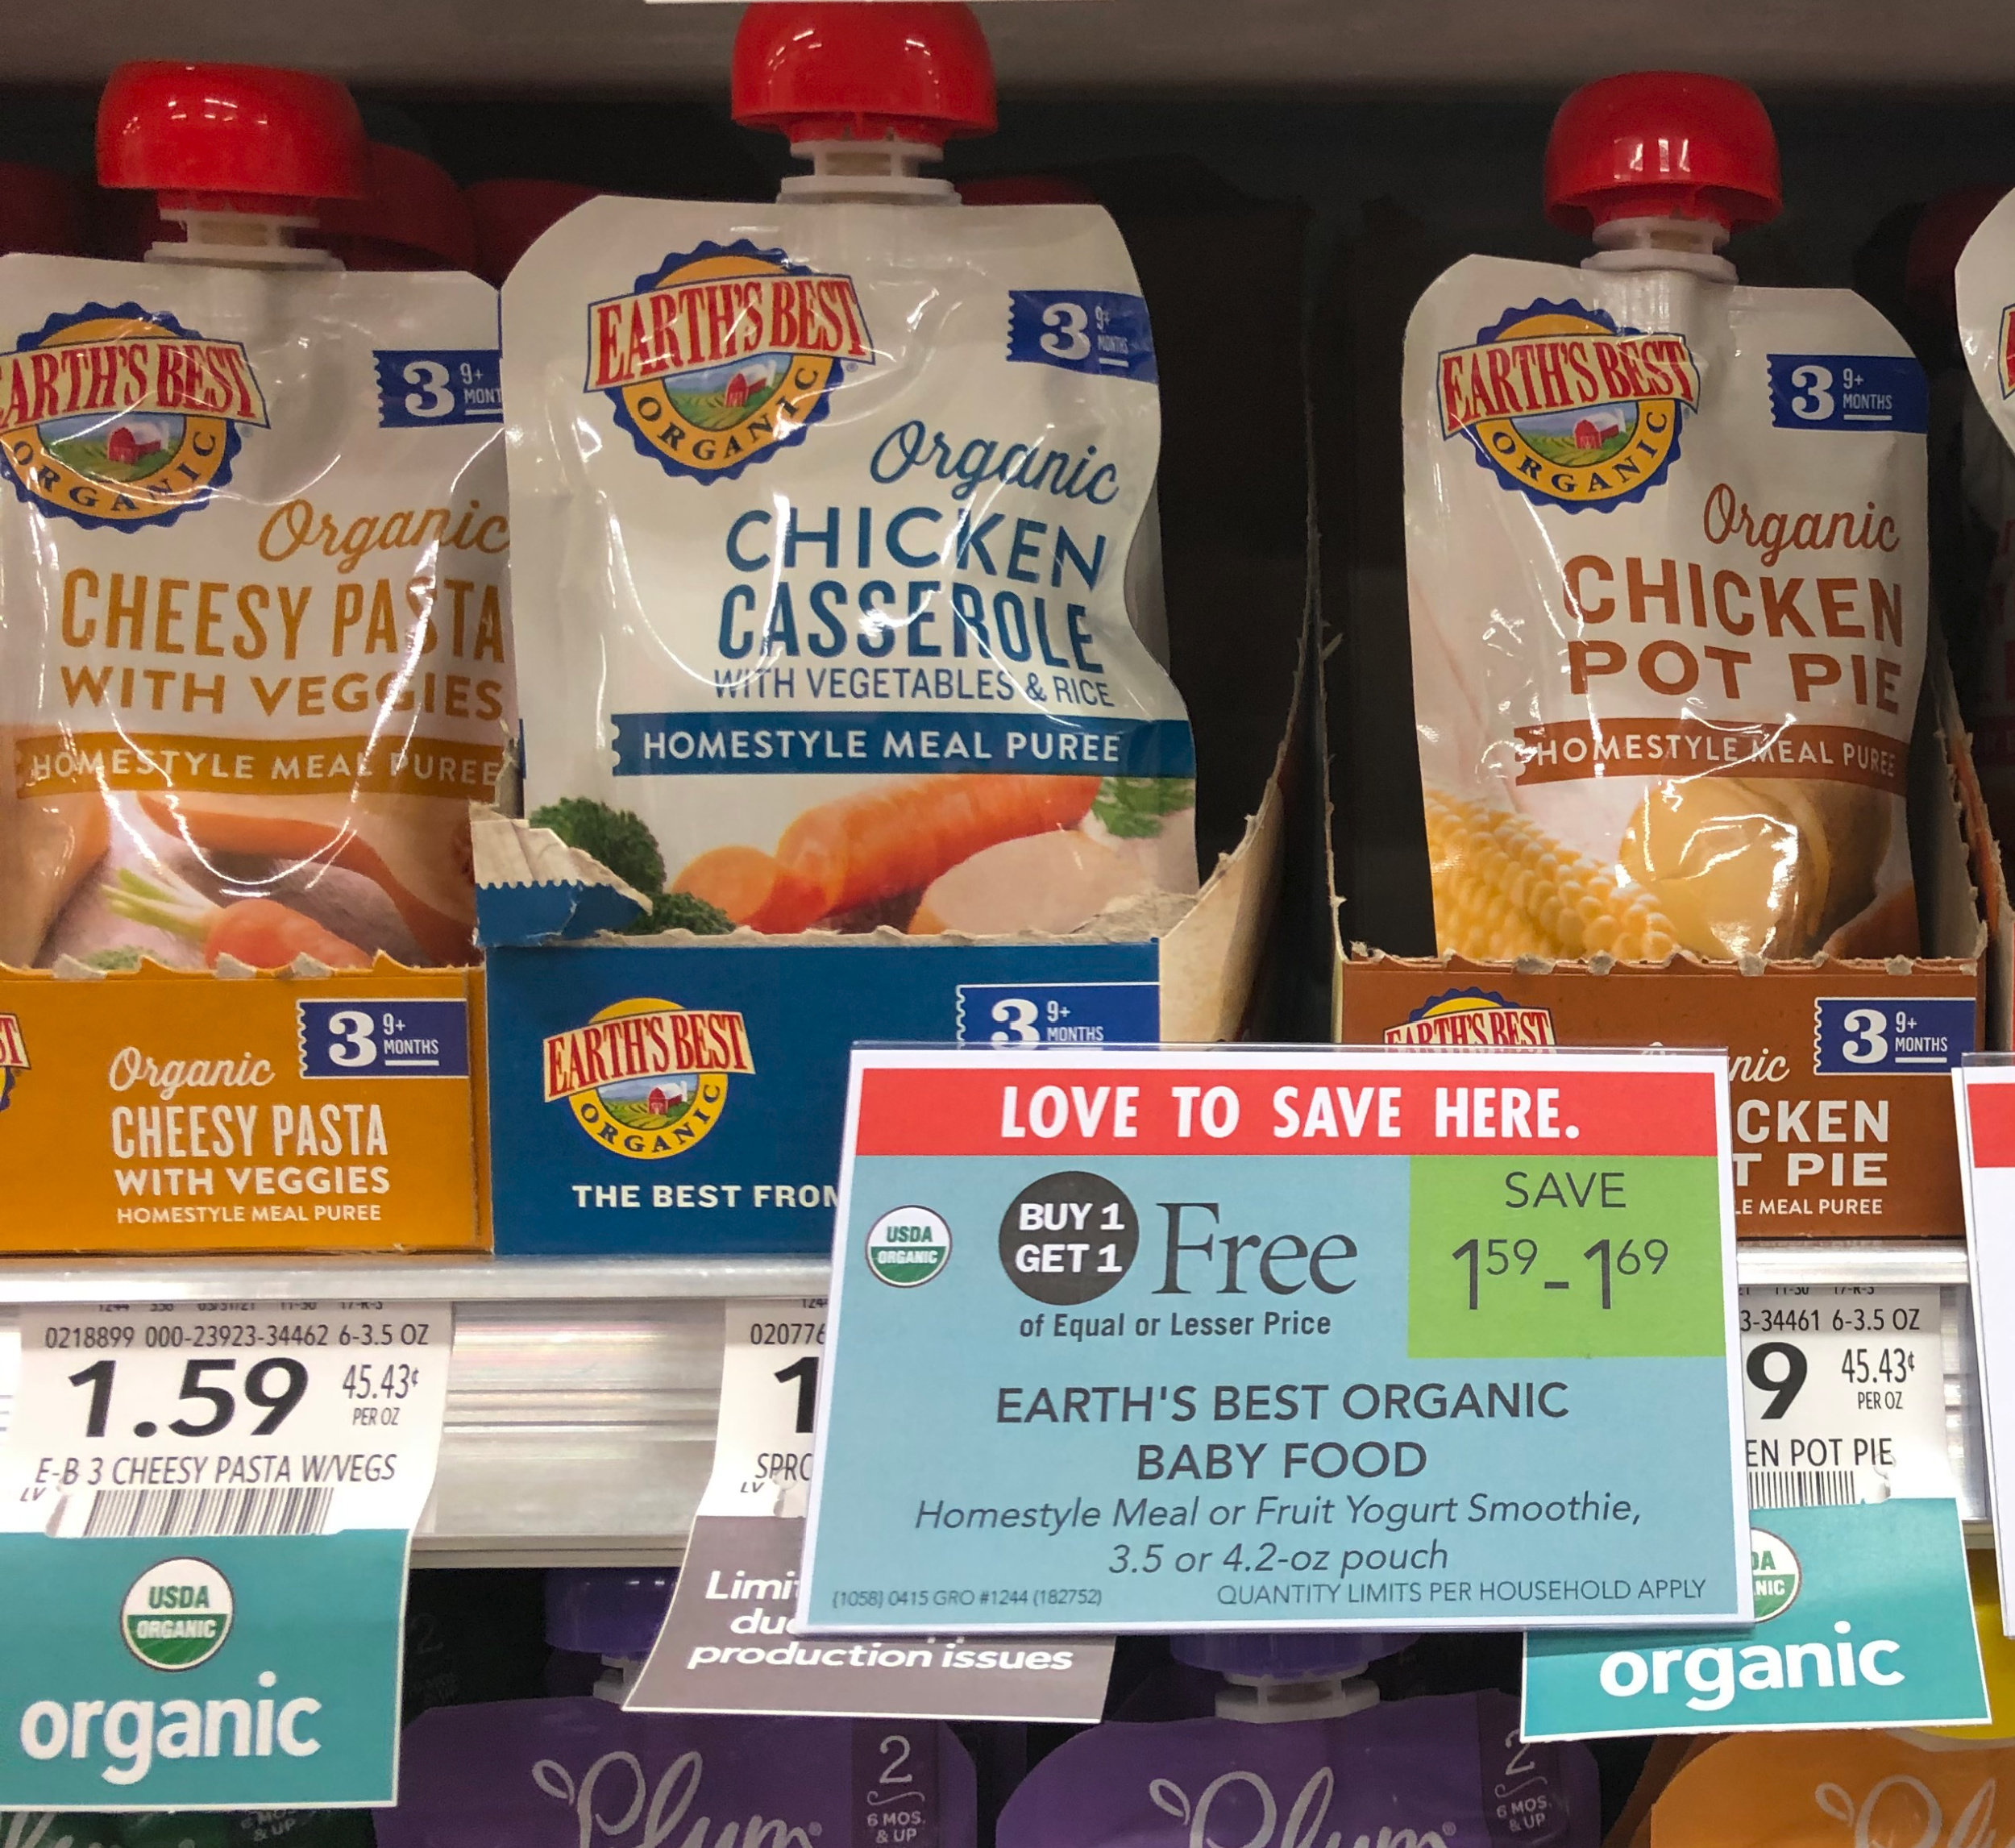 Earth’s Best Organic Baby Food As Low As 37¢ Per Pouch At Publix on I Heart Publix 1